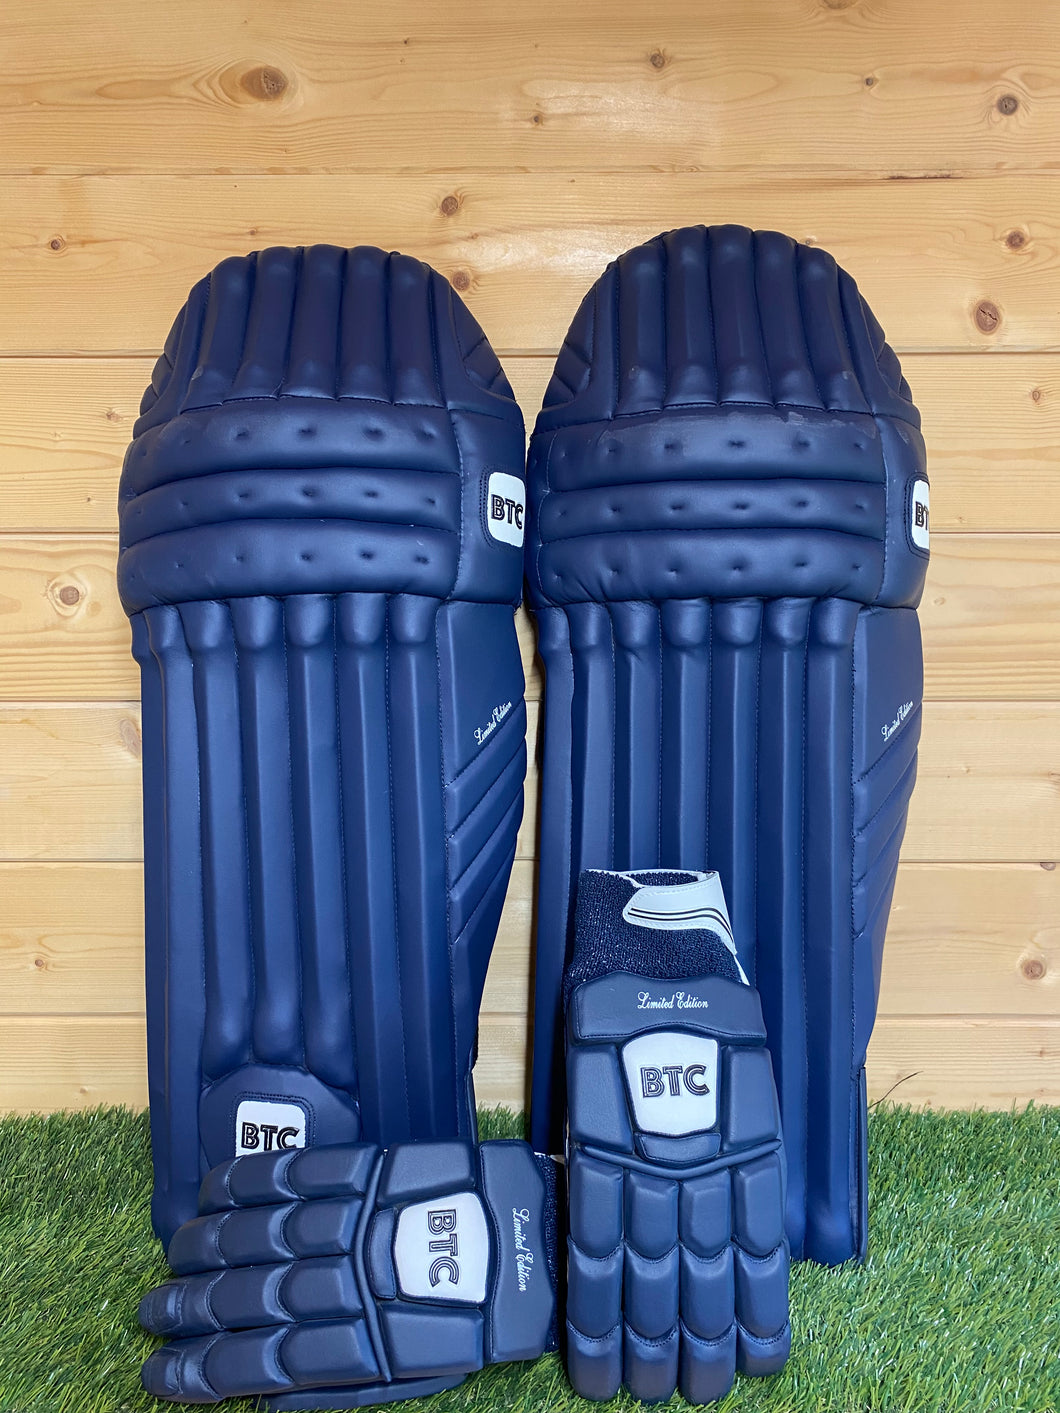 BTC Limited Edition Navy Blue Pads & Gloves